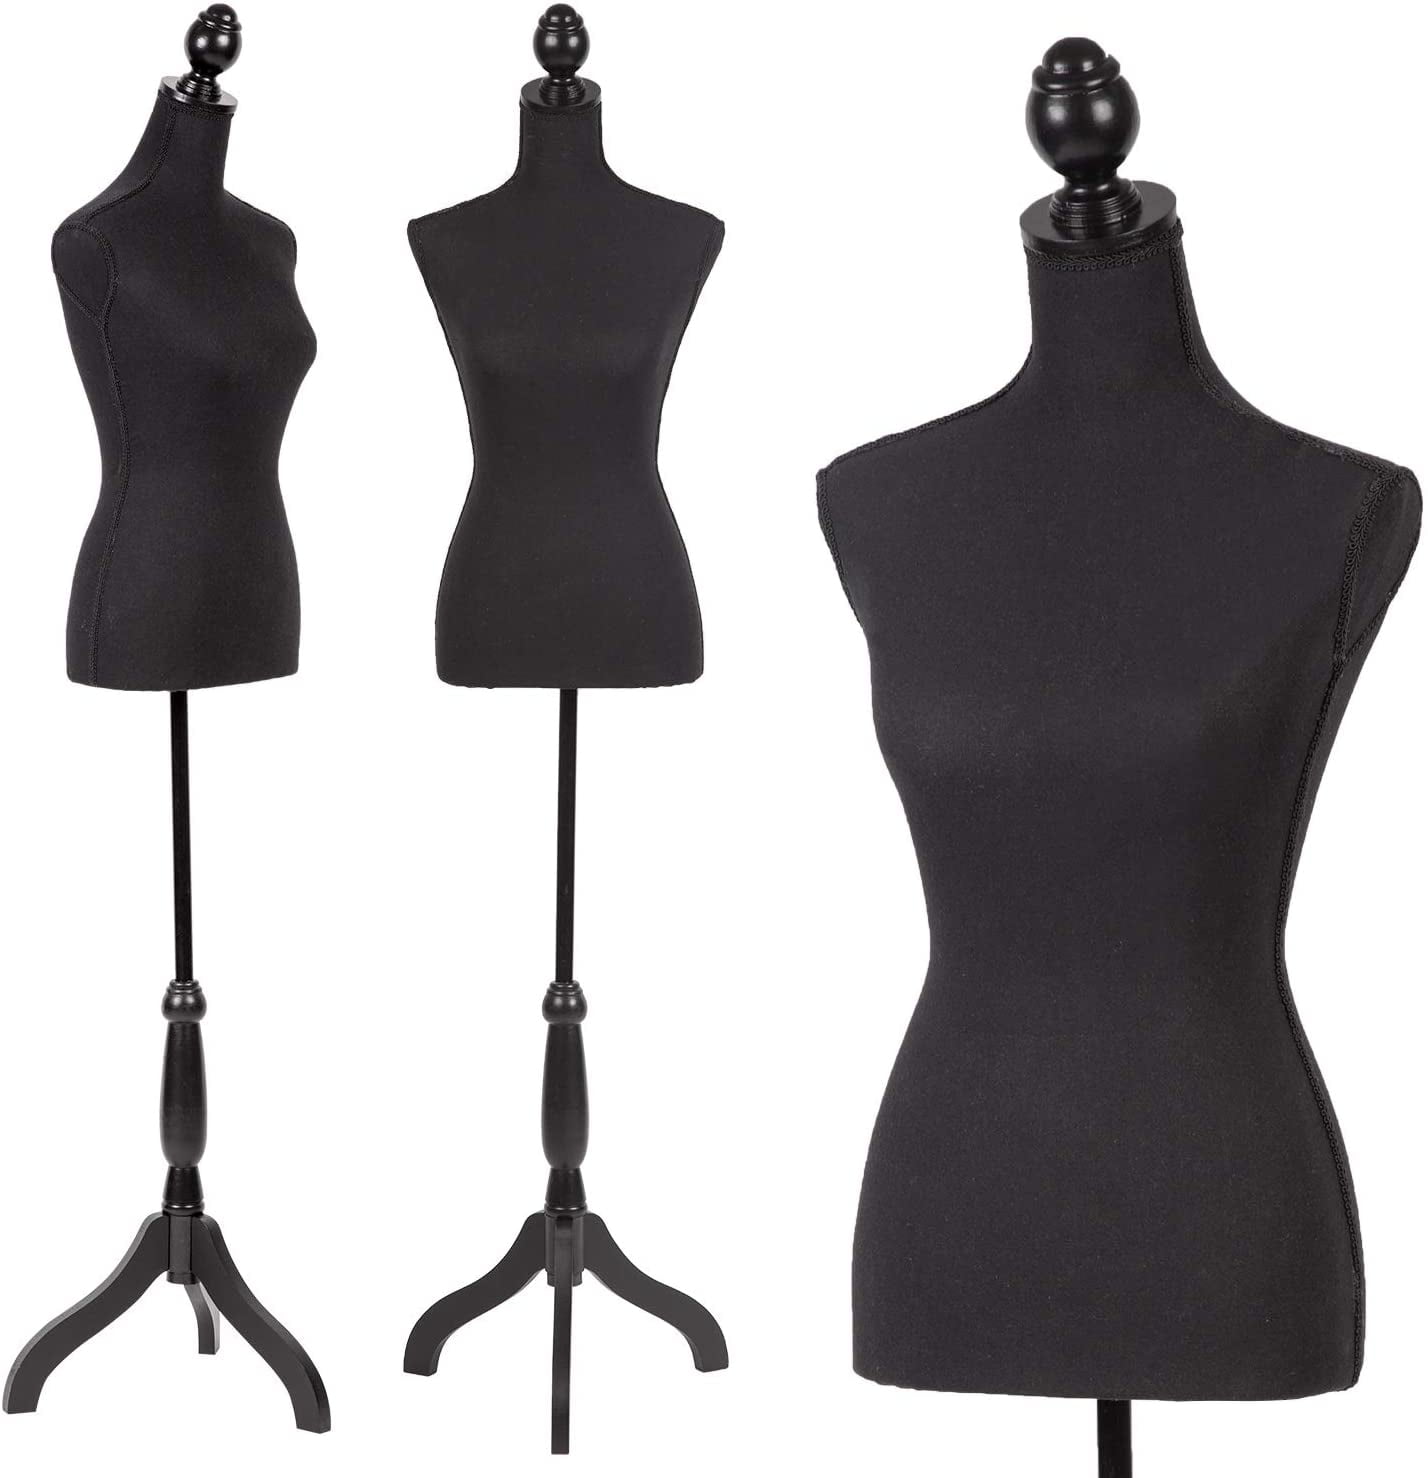 Details about   Black Female Mannequin Torso Dress Form with Tripod Stand display Hollow Foam 